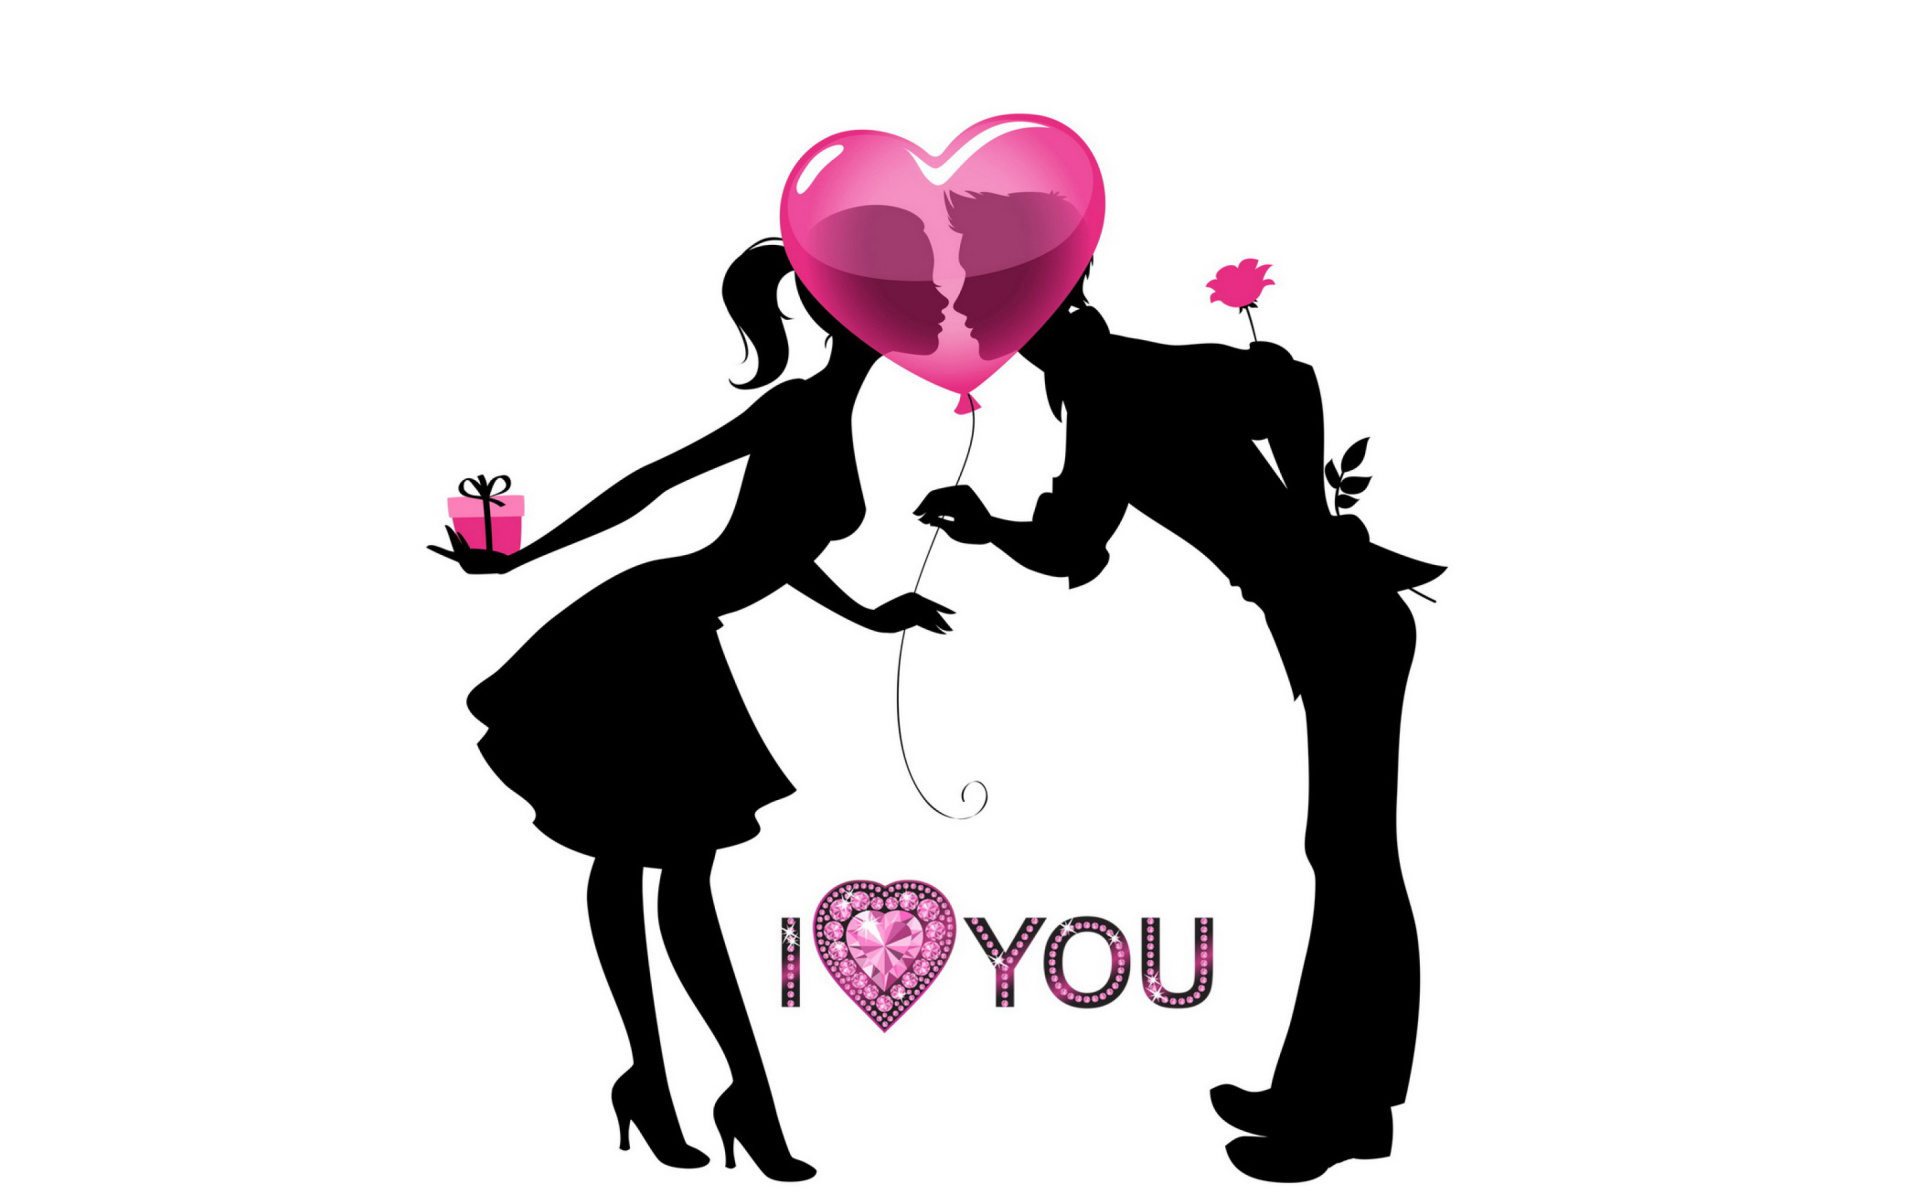 Love You Background Wallpaper Background Image